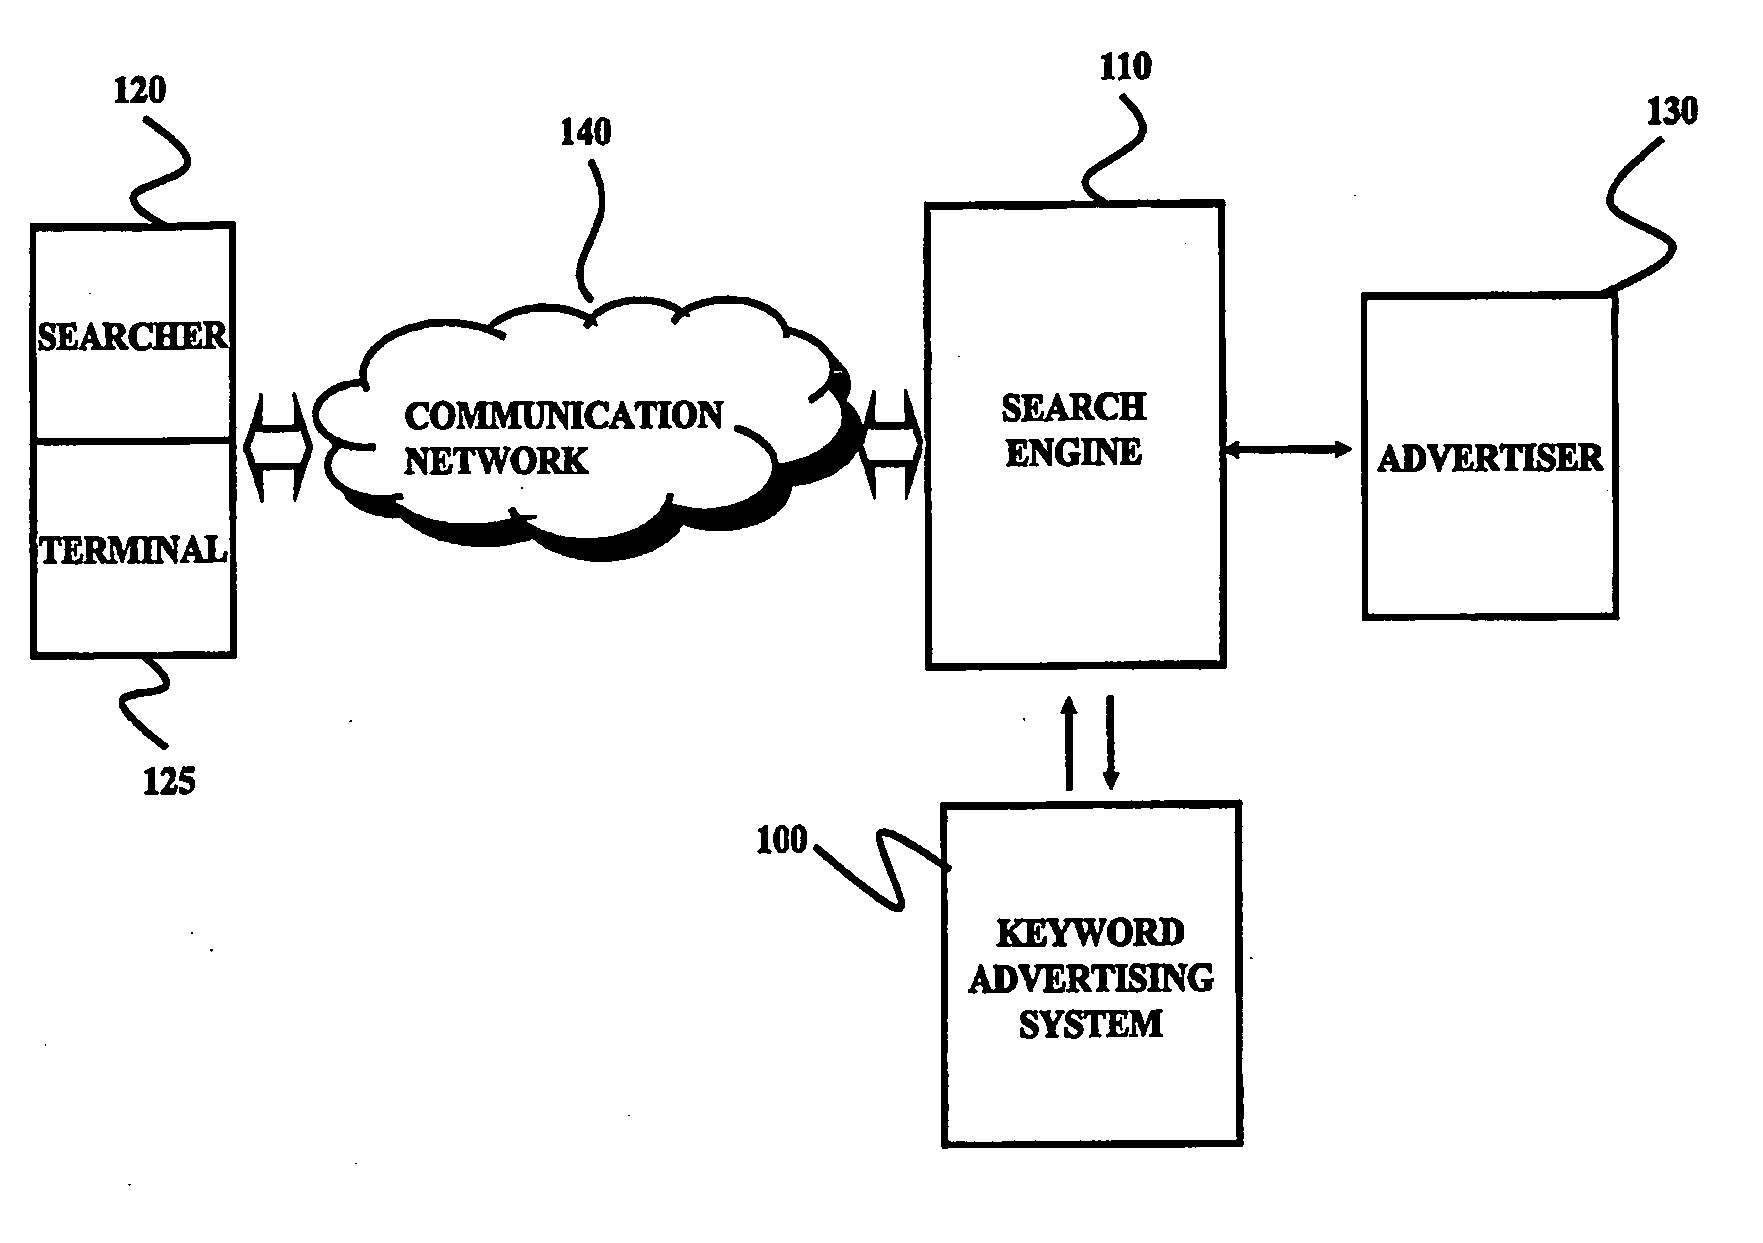 System and Method for Selecting Search Listing in an Internet Search Engine and Ordering the Search Listings